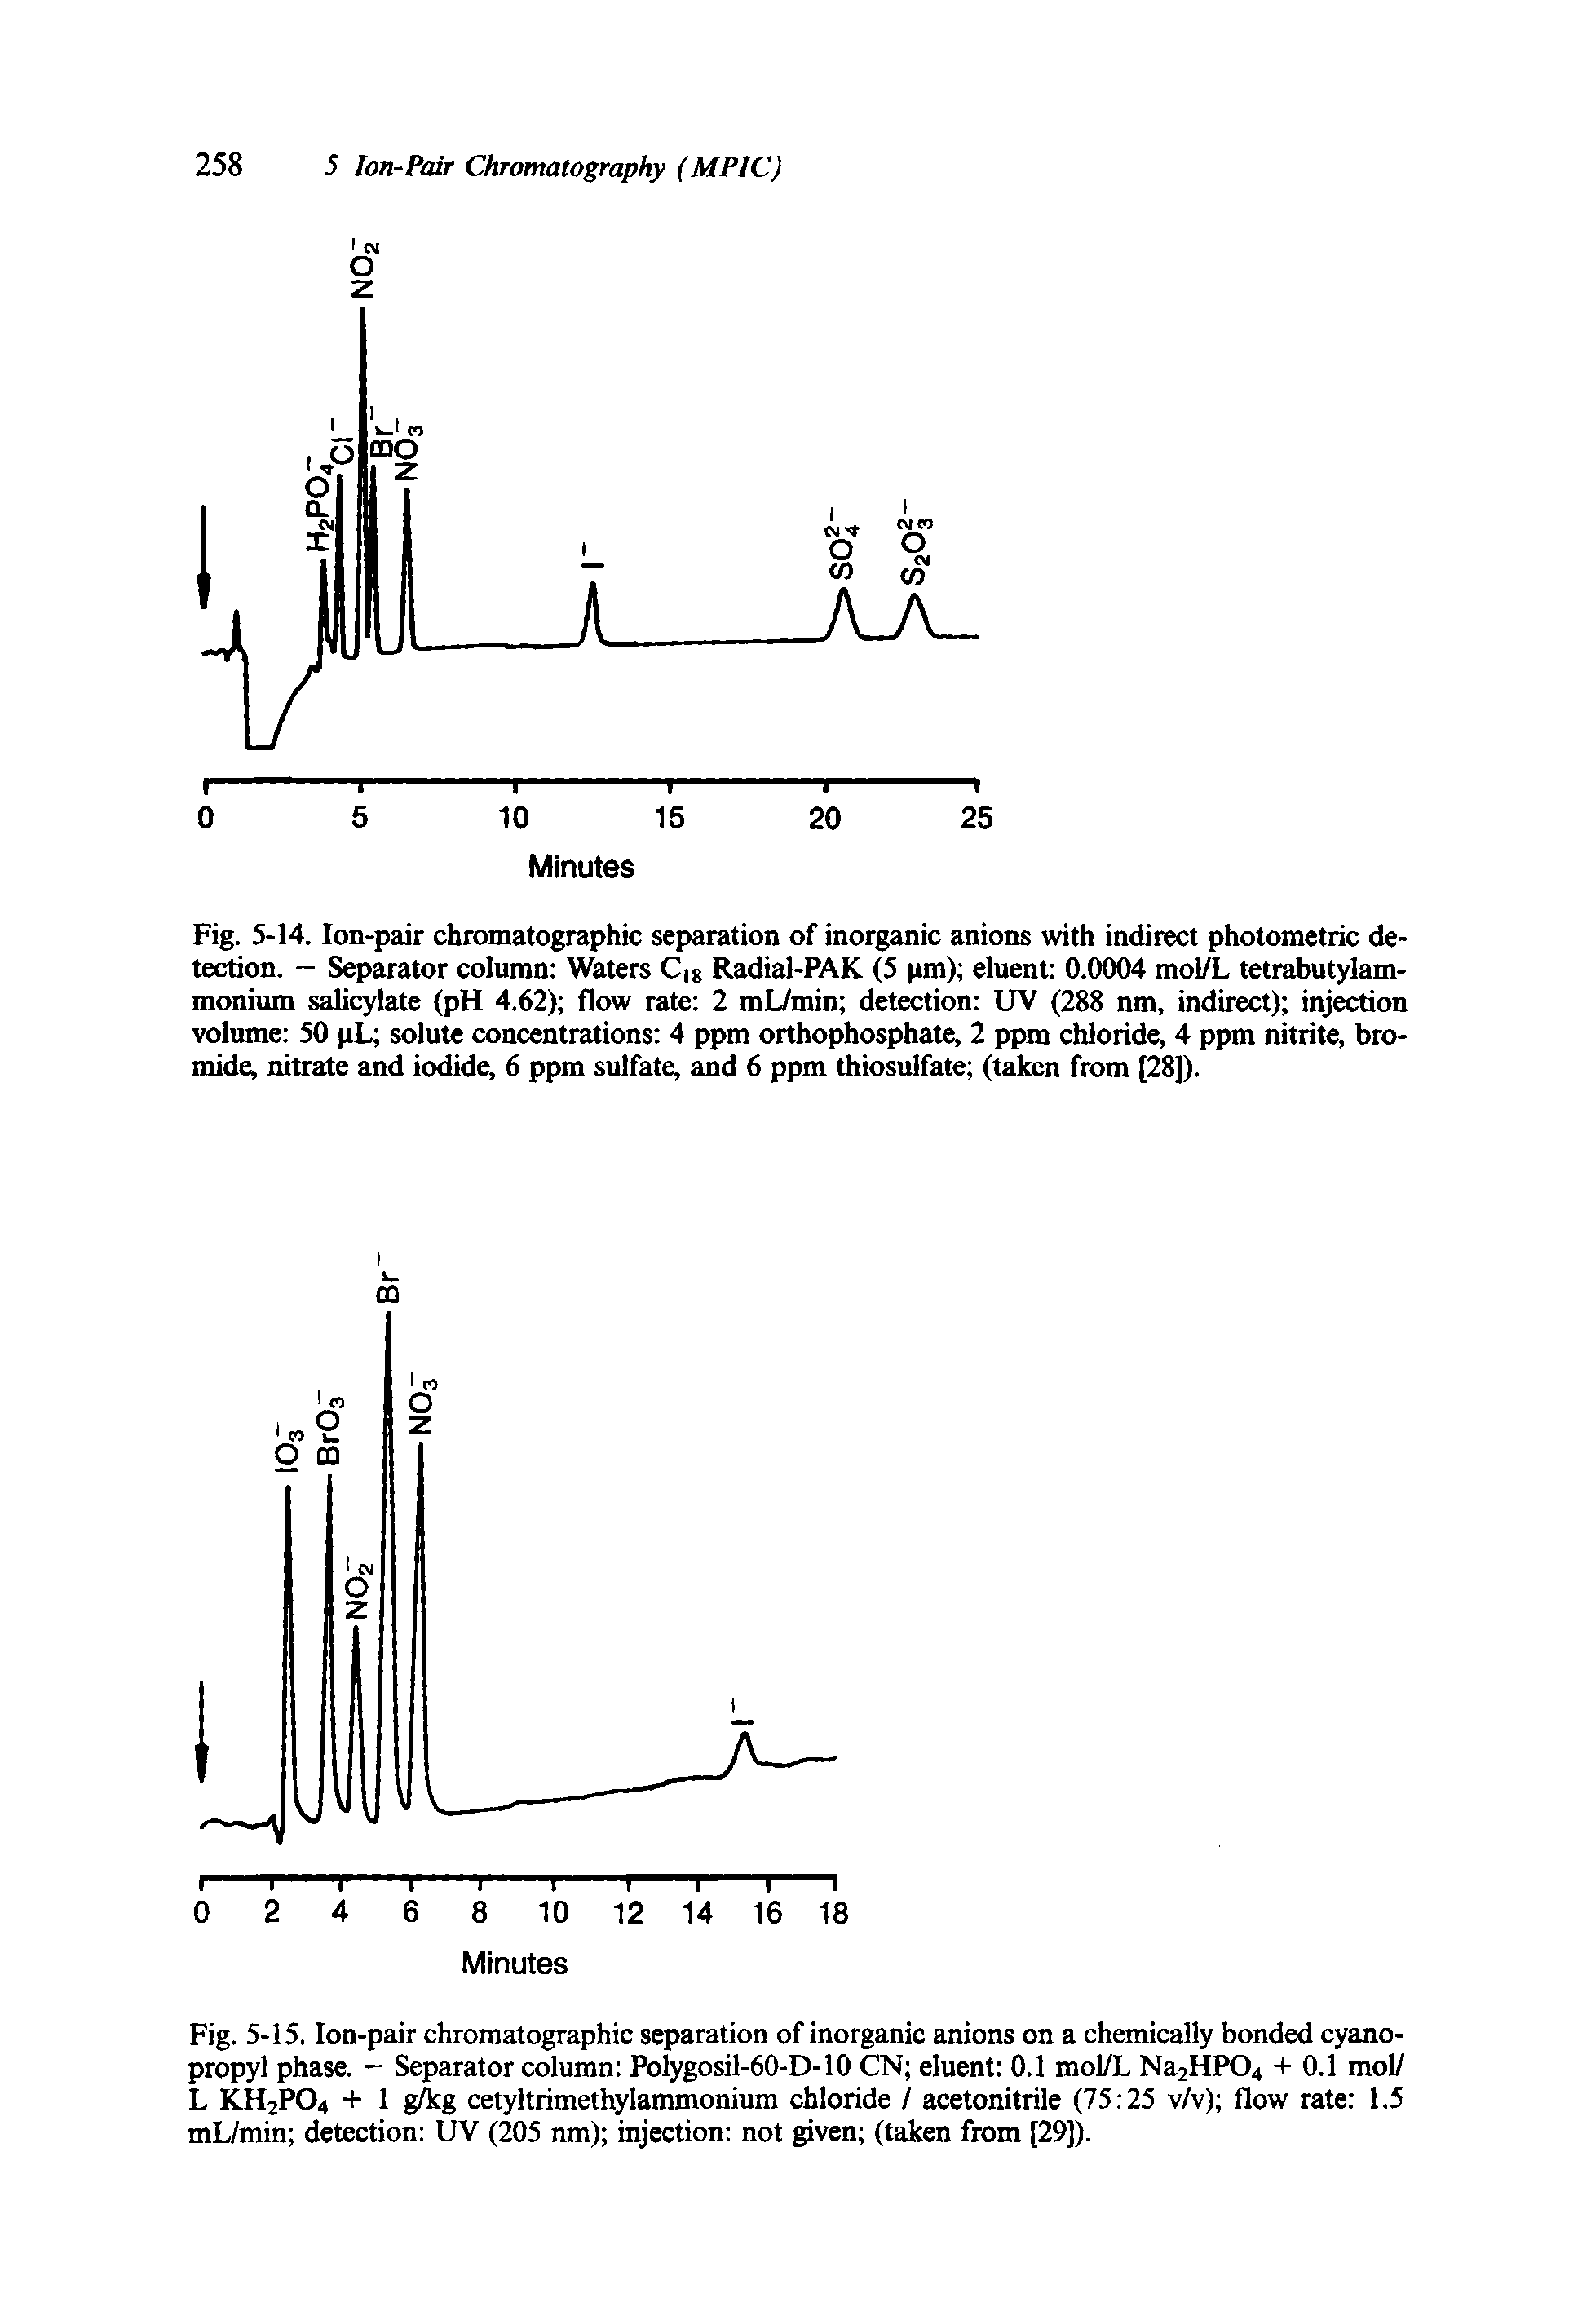 Fig. 5-14. Ion-pair chromatographic separation of inorganic anions with indirect photometric detection. — Separator column Waters C,% Radial-PAK (5 pm) eluent 0.0004 mol/L tetrabutylam-monium salicylate (pH 4.62) flow rate 2 mL/min detection UV (288 nm, indirect) injection volume 50 pL solute concentrations 4 ppm orthophosphate, 2 ppm chloride, 4 ppm nitrite, bromide, nitrate and iodide, 6 ppm sulfate, and 6 ppm thiosulfate (taken from [28]).